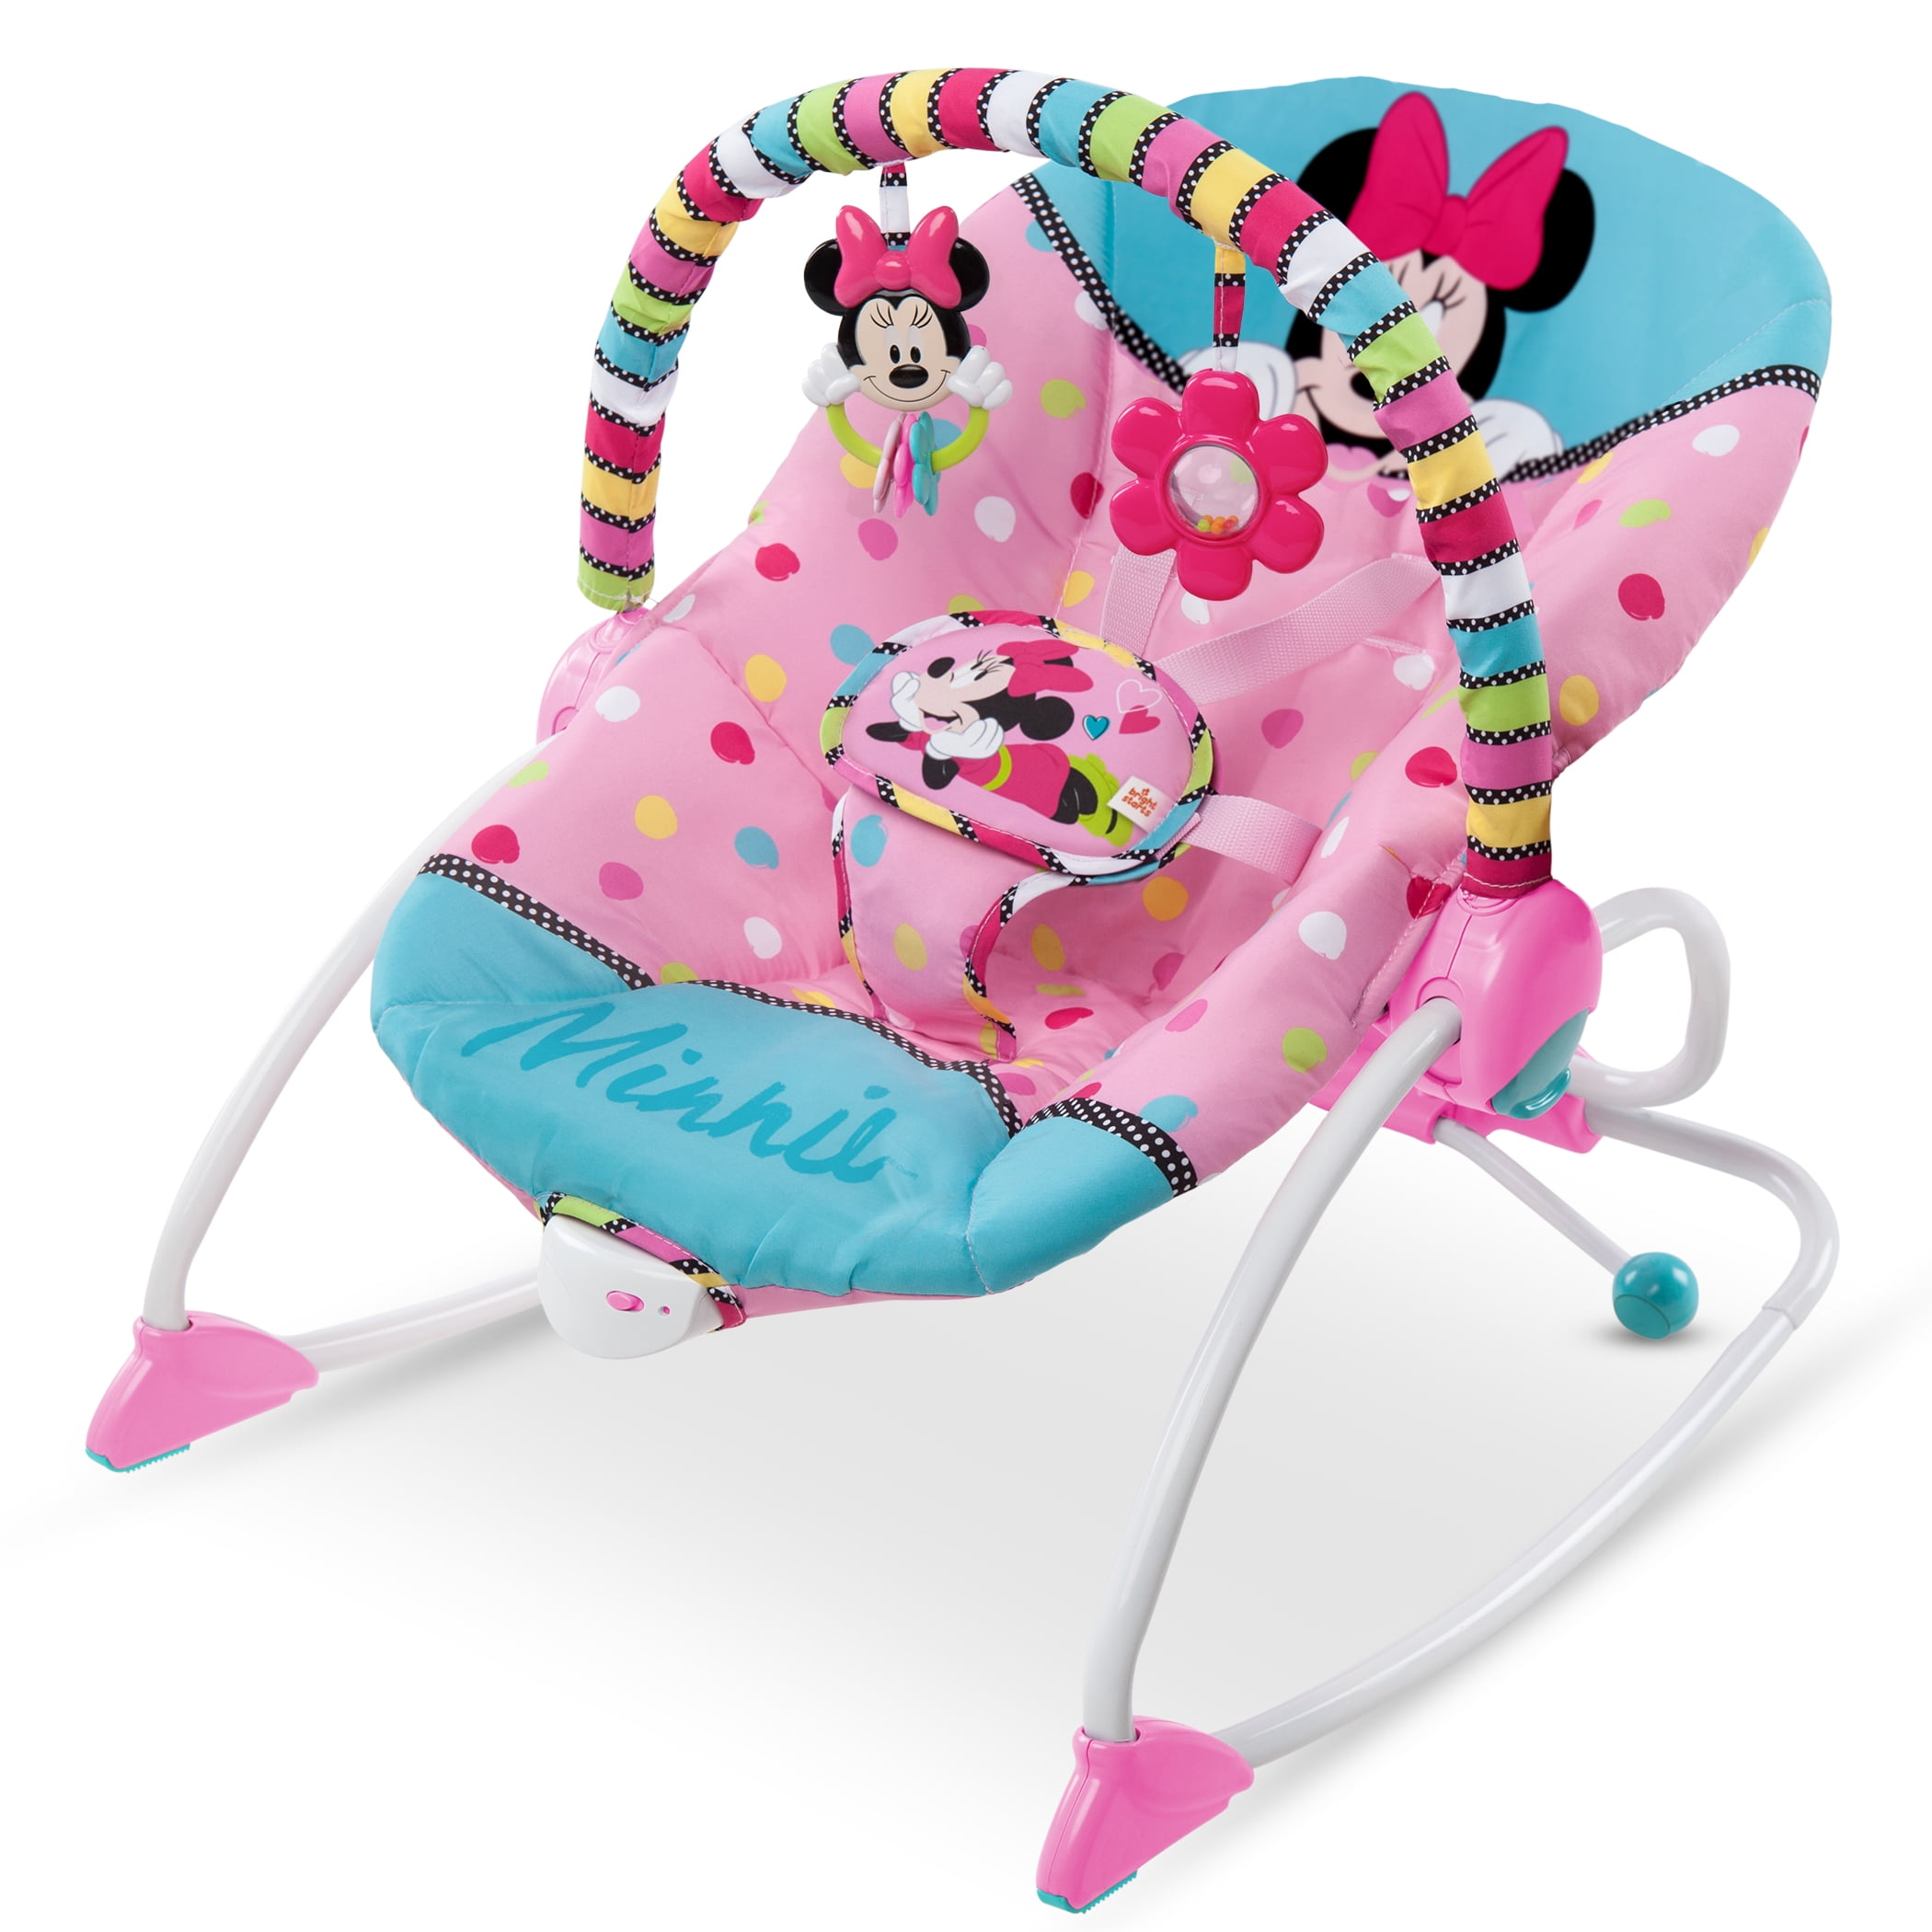 Baby Minnie Mouse Girls Activity Centre Toddler Jumper Pink Play Bouncing Chair 